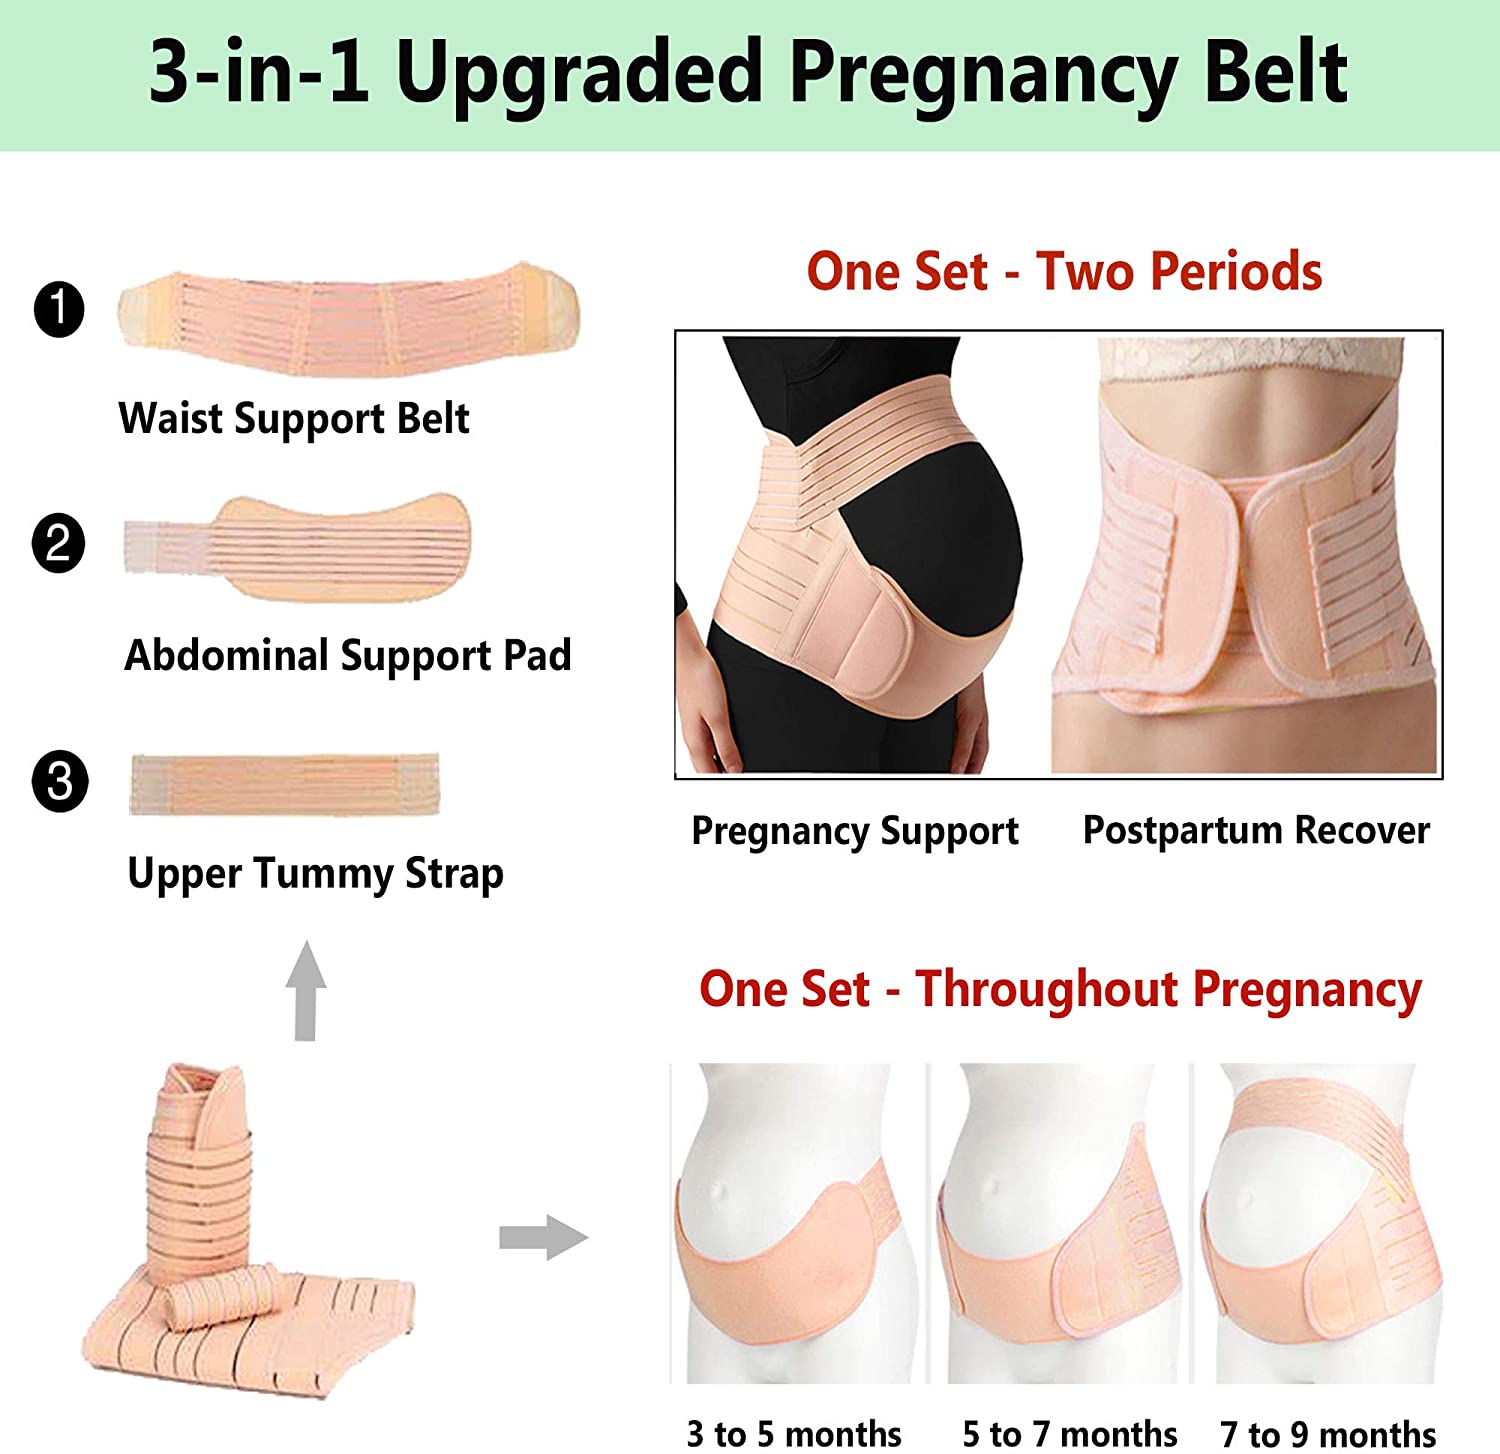 Ilfioreemio Pregnancy Belt, 3-in-1 Maternity Belt Pregnancy Support Band with Belly Band Brace for Pain Relief and Postpartum Recovery, Lightweight Breathable Adjustable Waist/Back/Abdomen Band - image 4 of 7